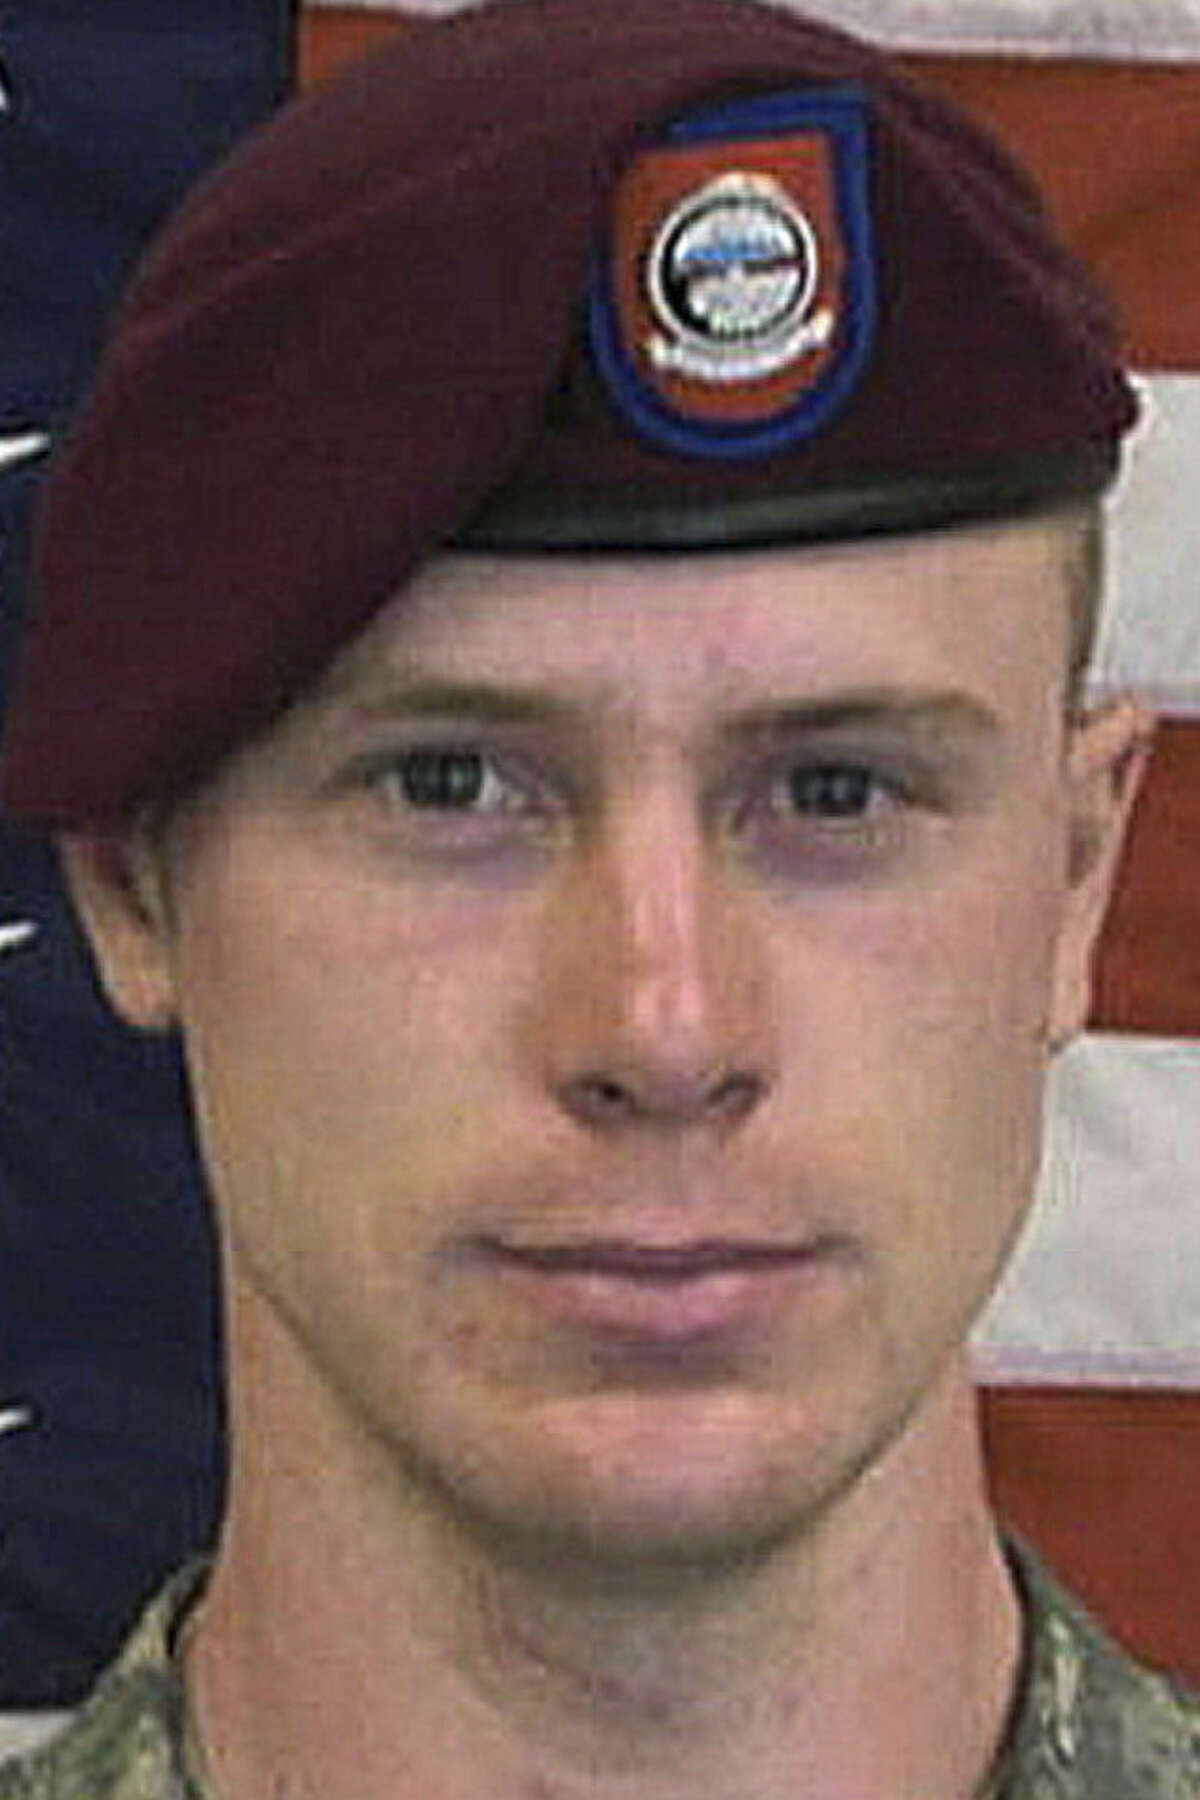 Sgt. Bowe Bergdahl was held by the Taliban for five years.